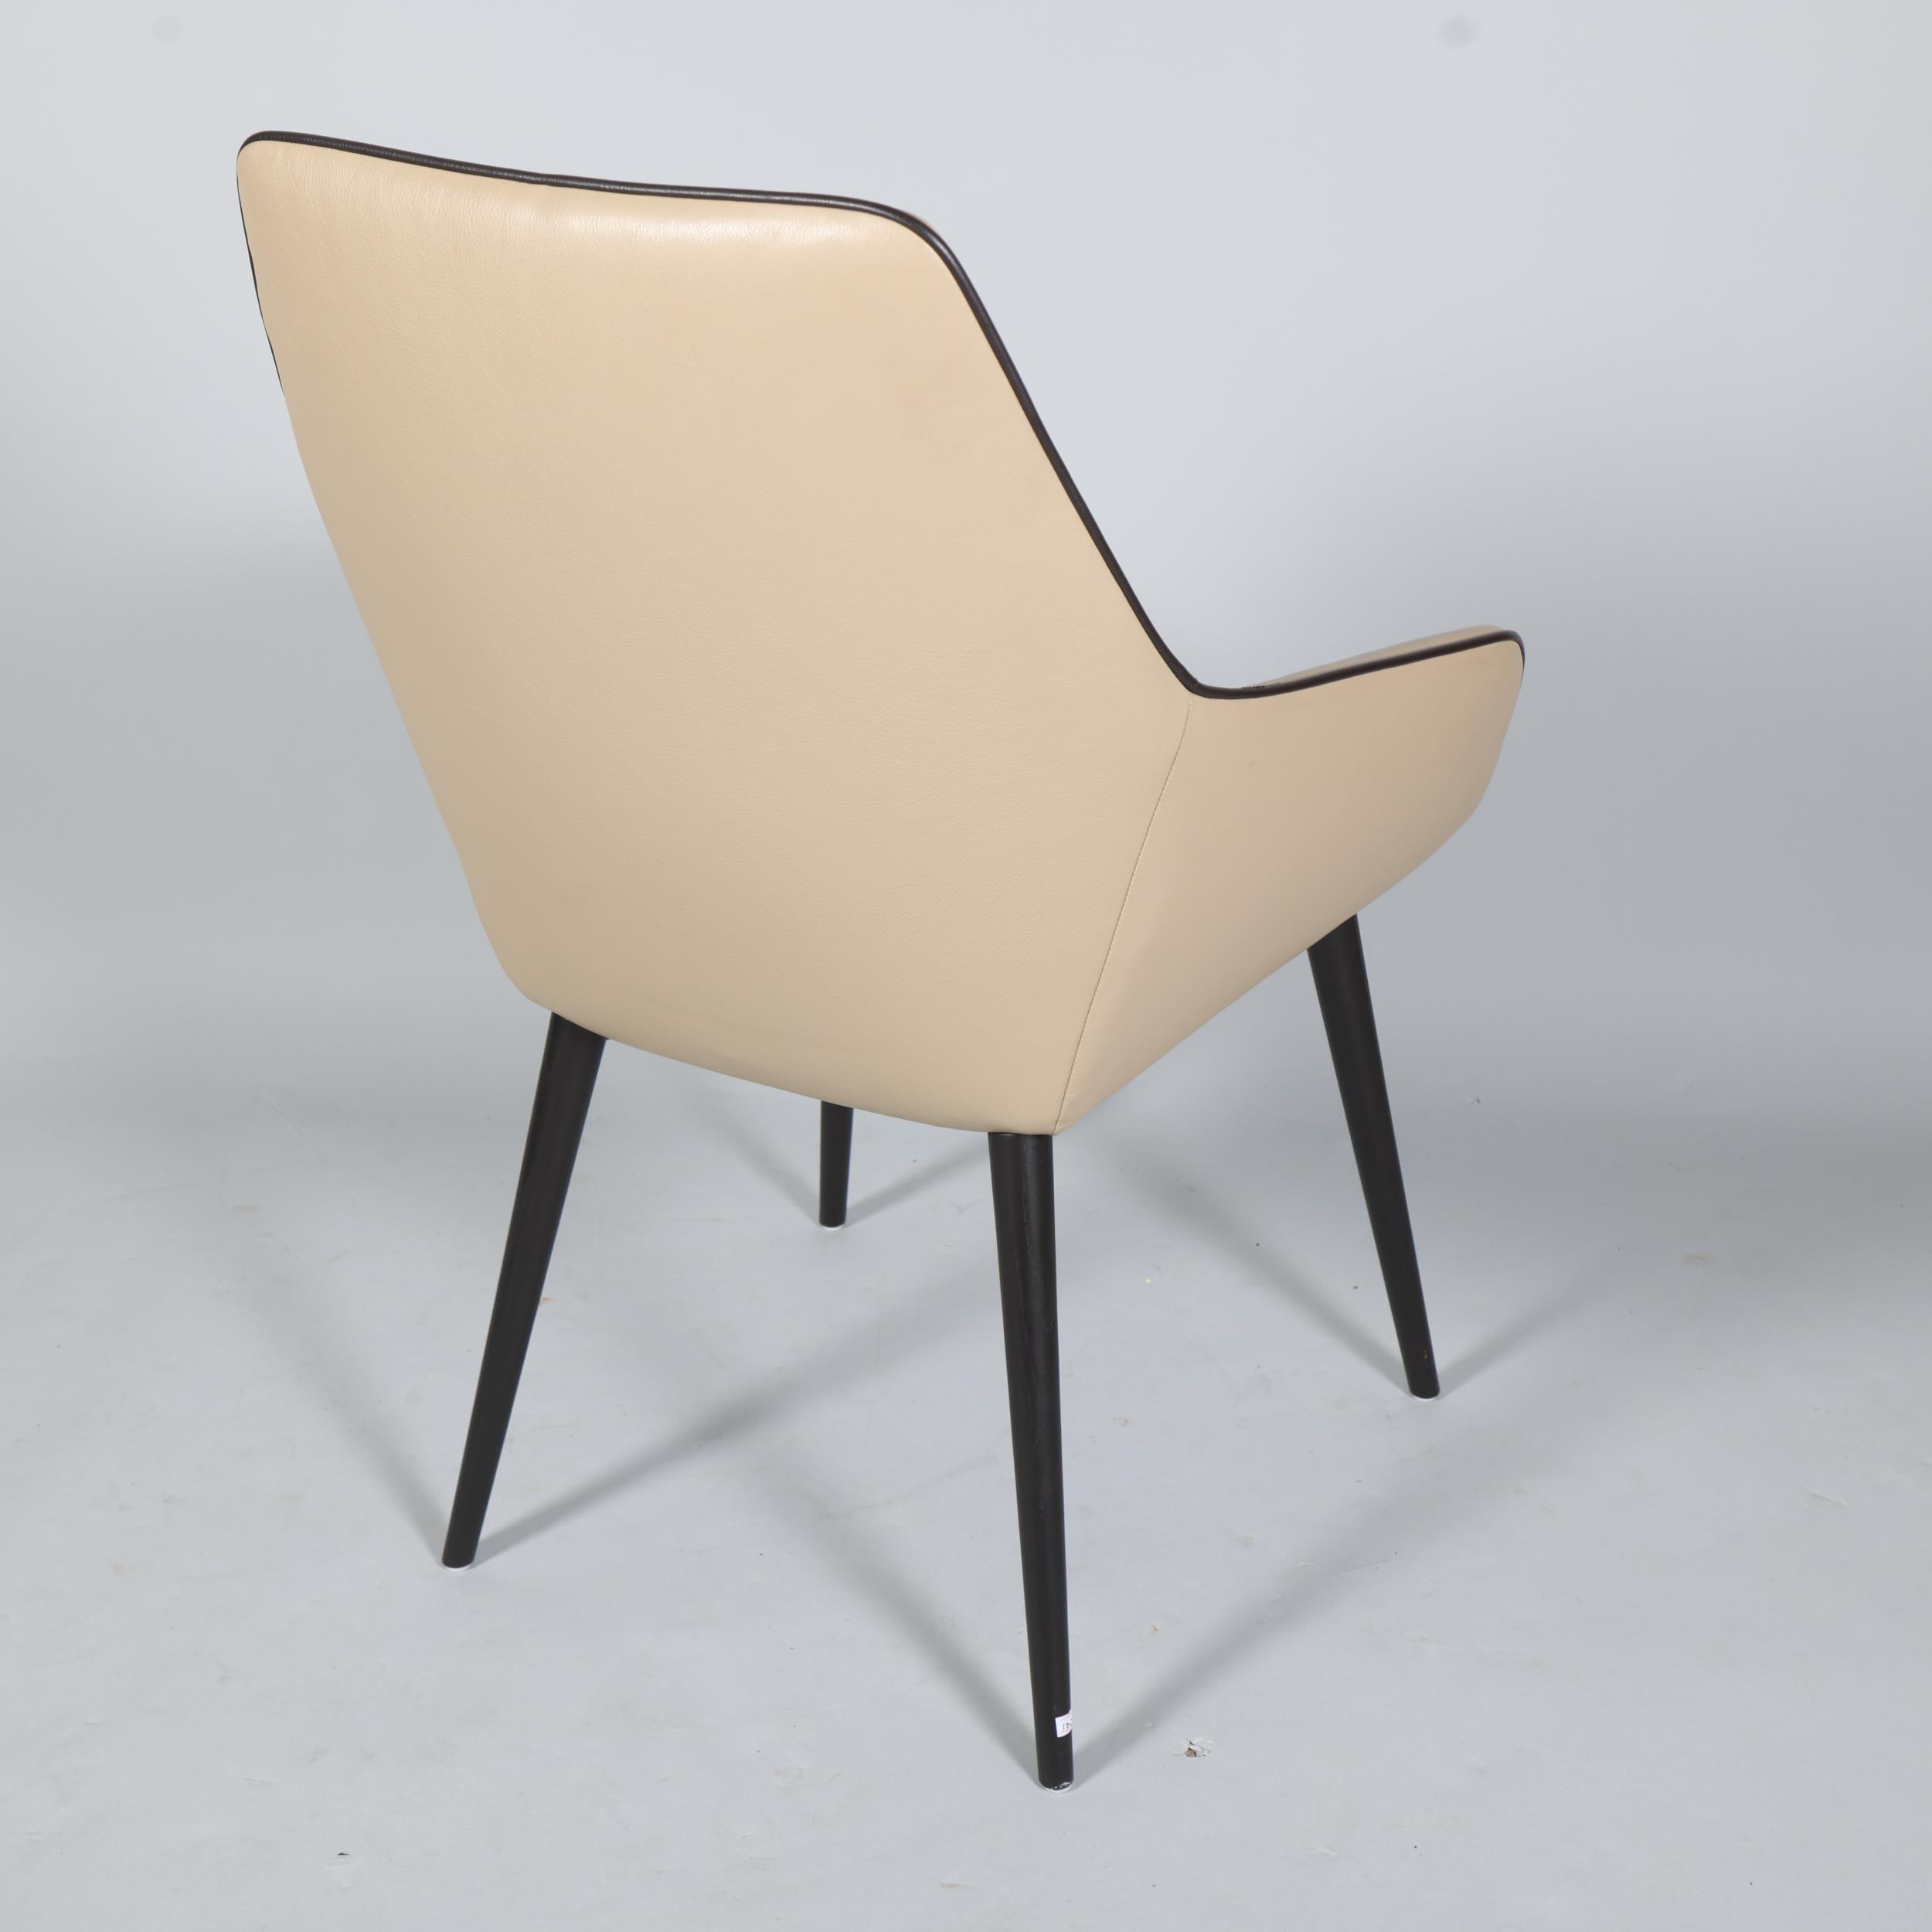 Jehs and Laub, a contemporary design Ray Soft armchair in fine leather by Brunner, Germany, with - Image 3 of 4